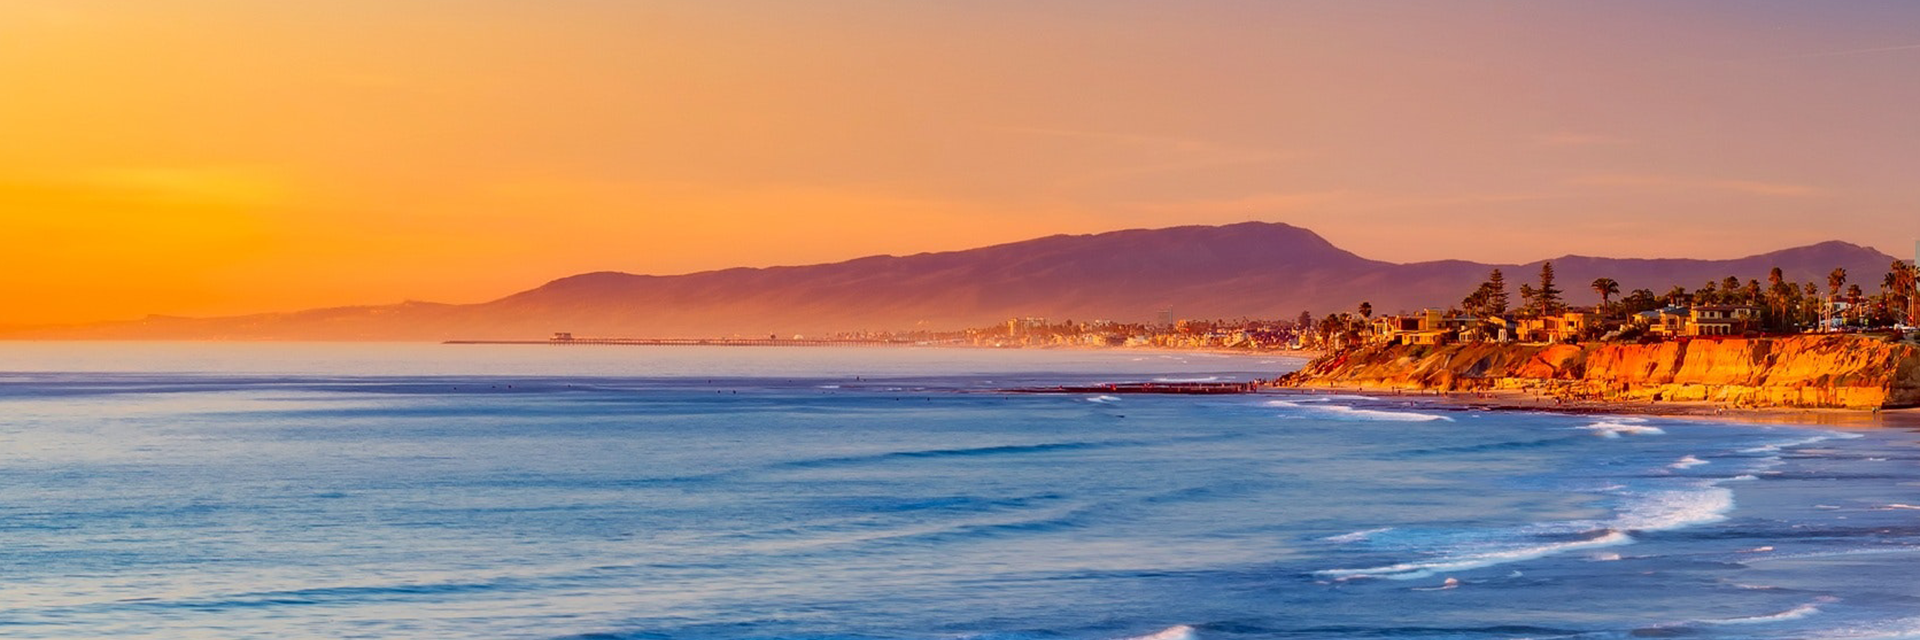 A sunset view of a beach in Southern California 